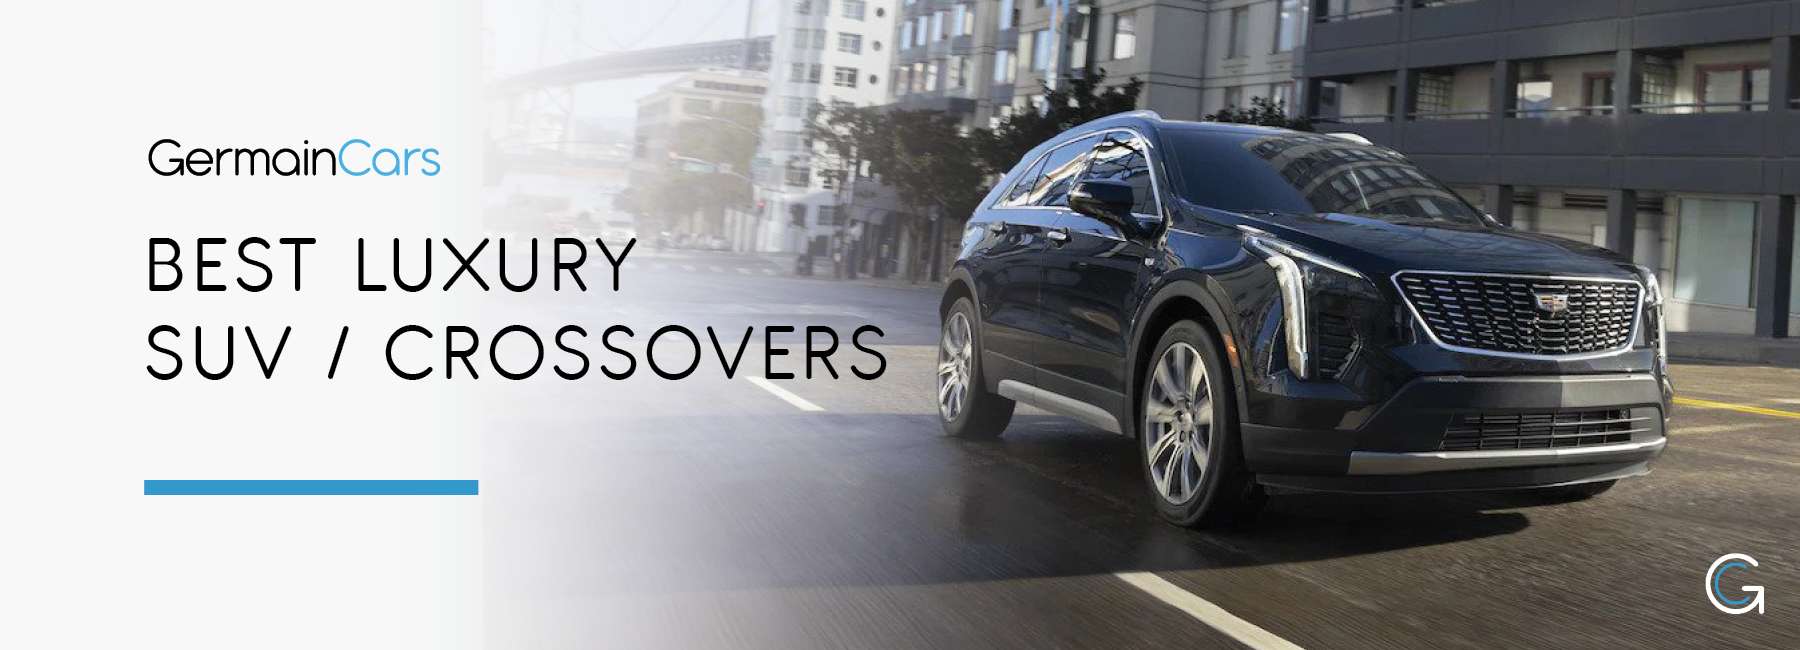 Best Luxury Compact Crossovers and SUVs (Luxury Brands) at Germain Cars